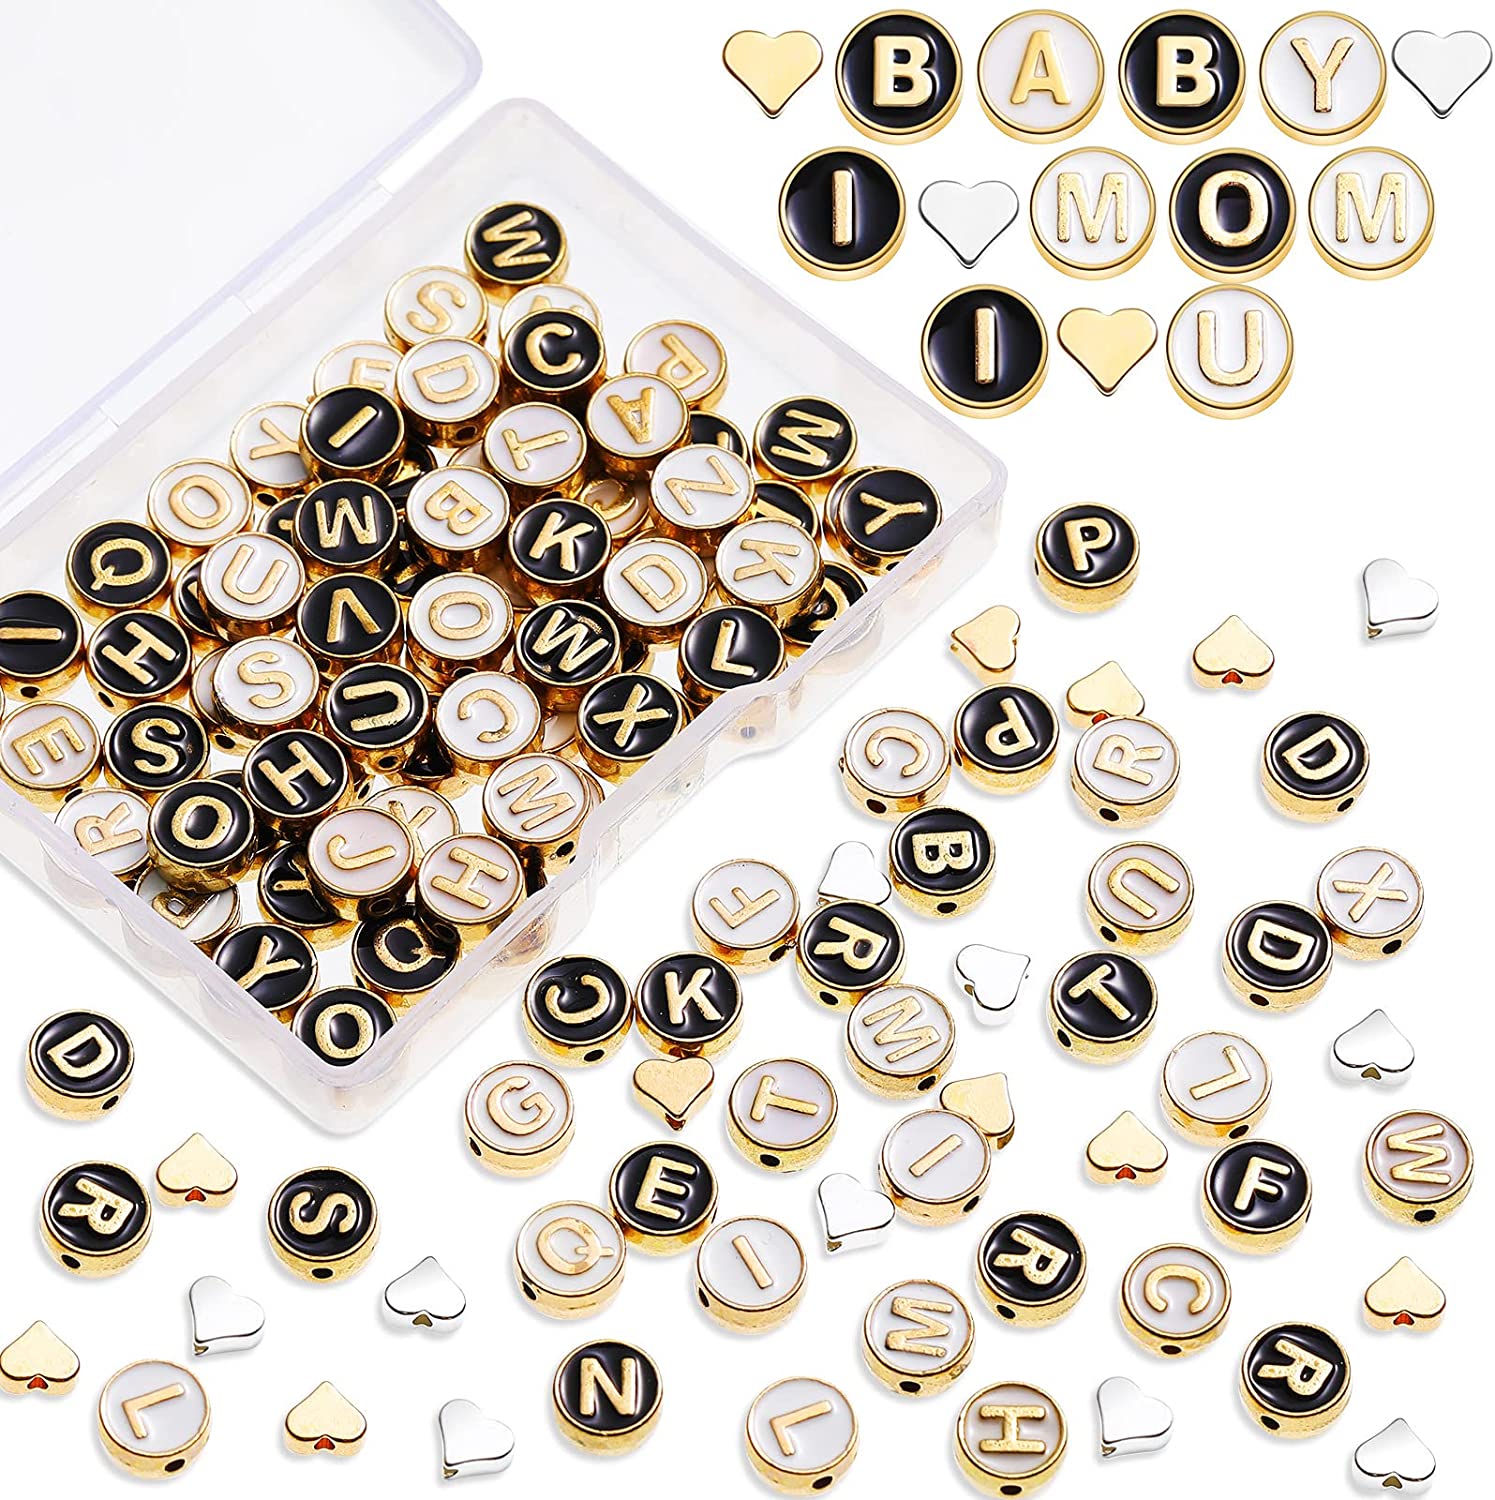 ToBeIT 1000pcs Letter Beads Gold Letter BeadsAcrylic Alphabet Letter A-Z Cube Beads for Jewelry Making, Bracelets, Necklaces